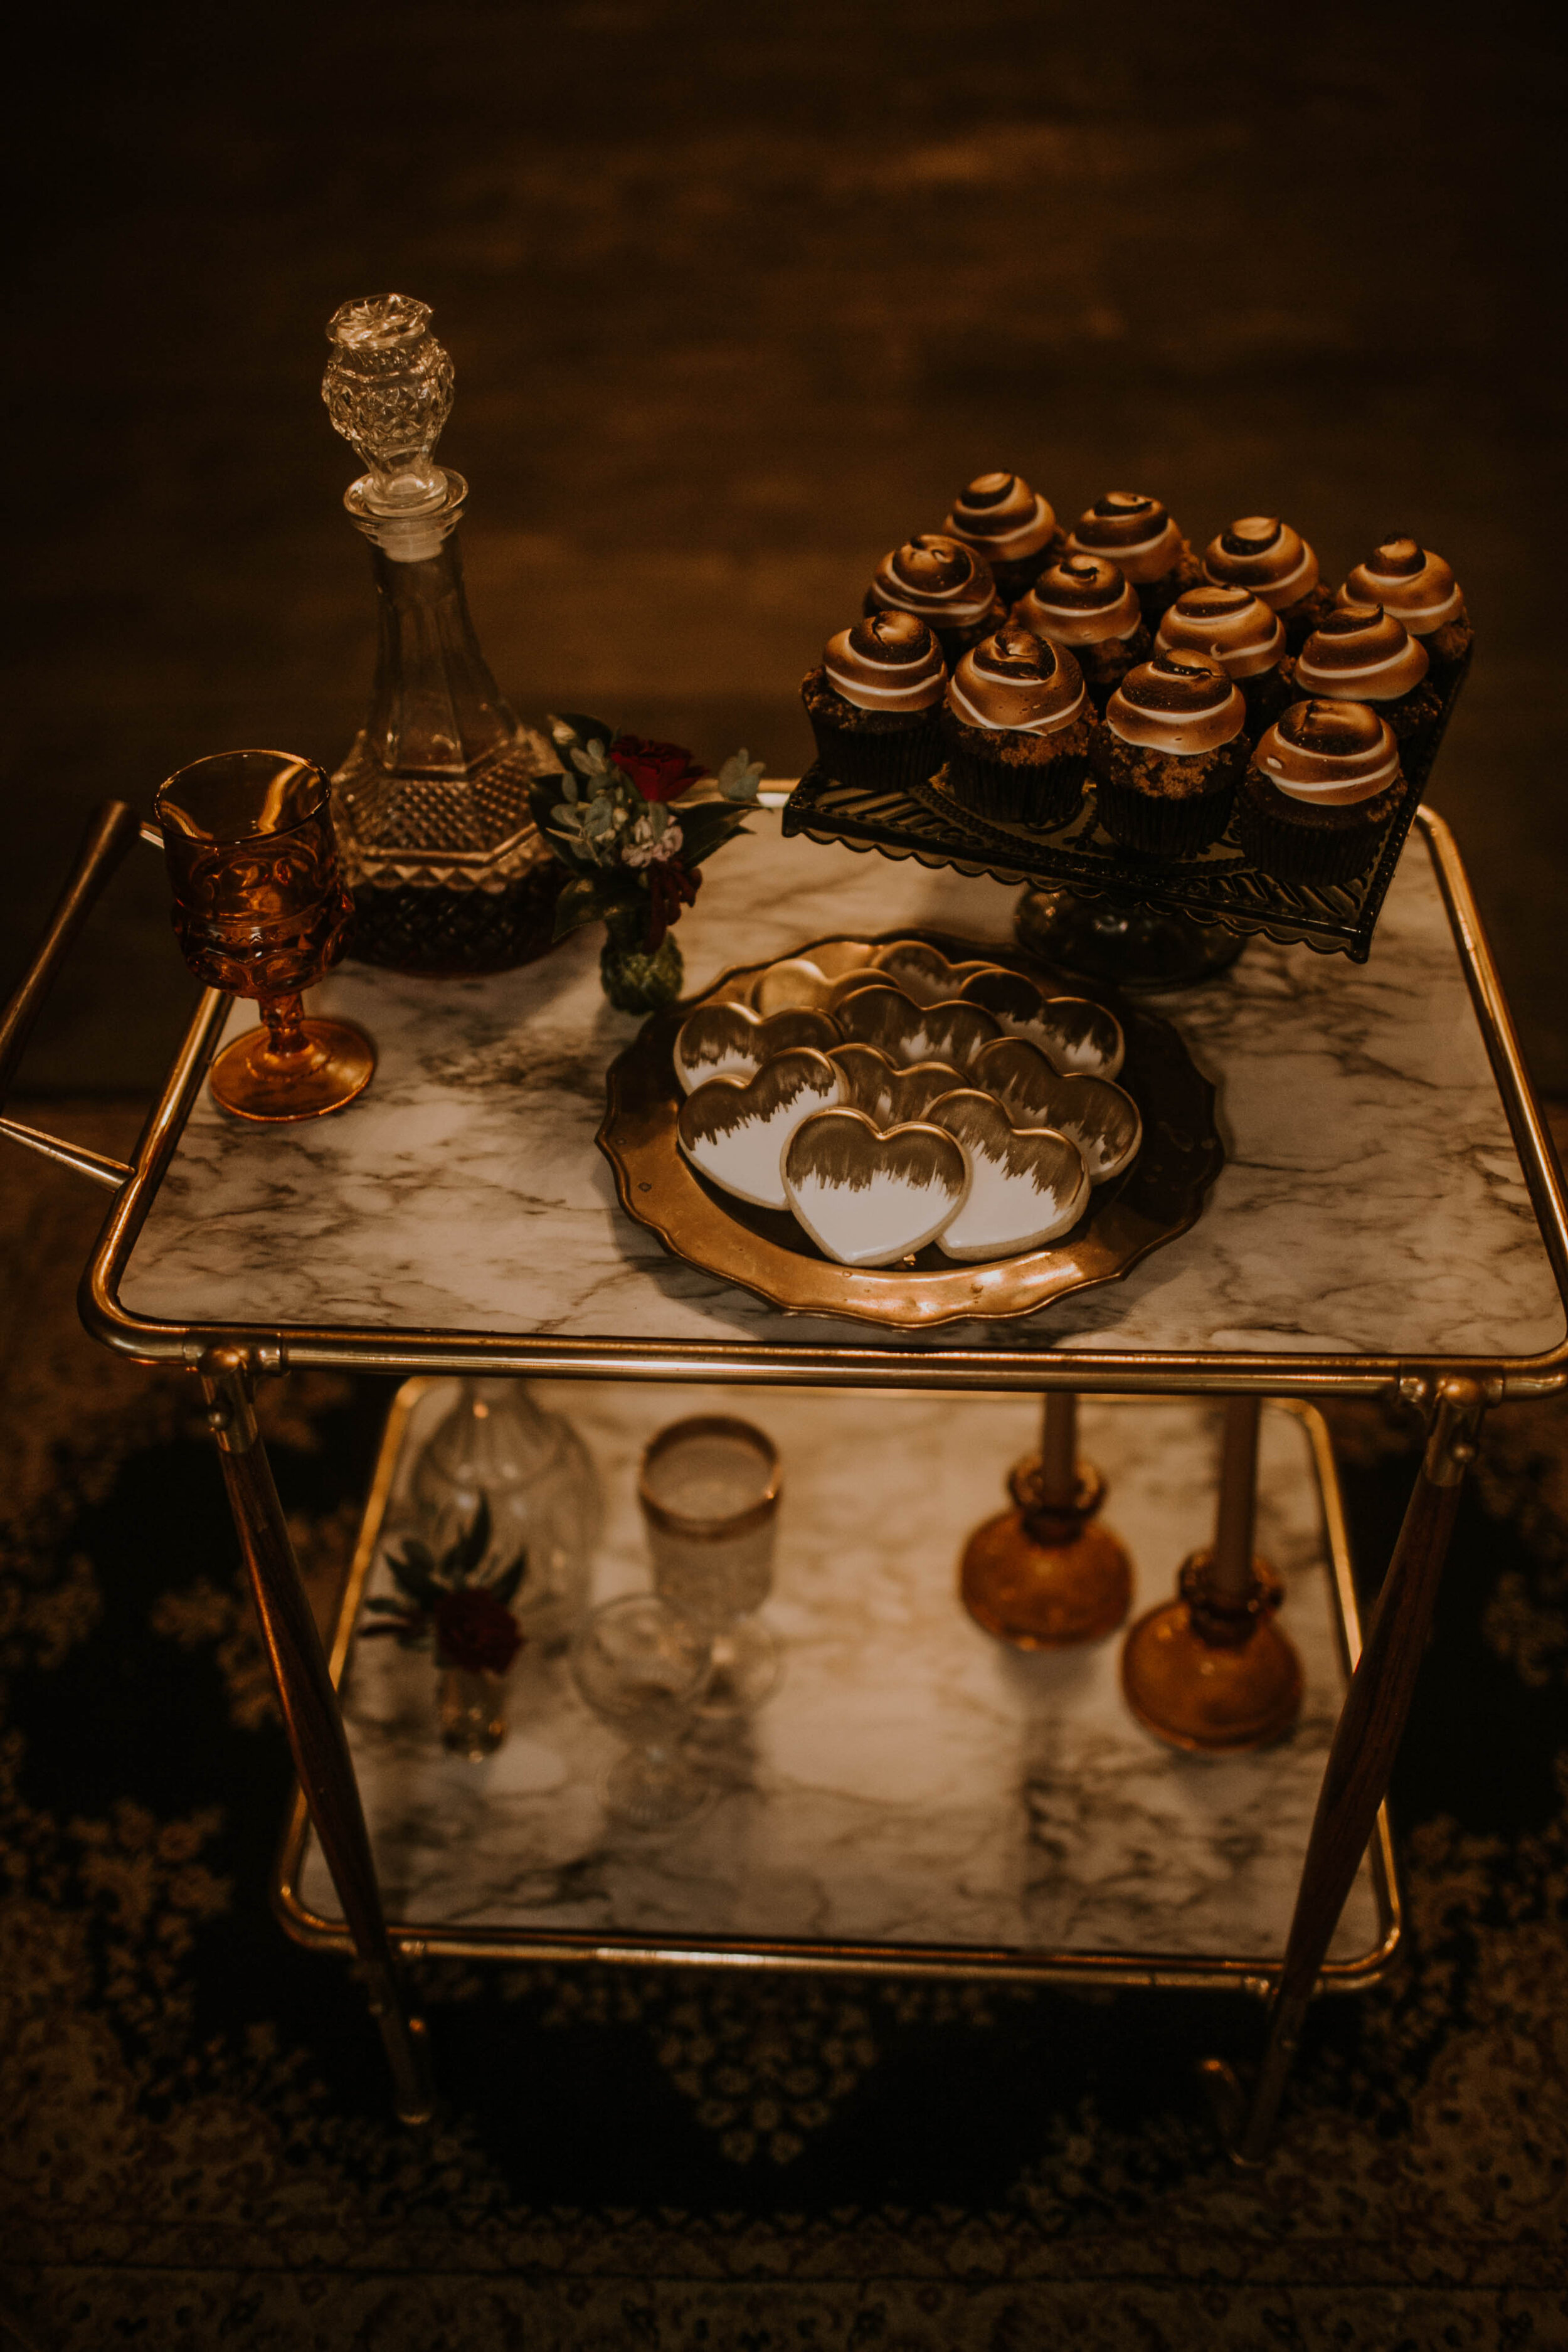 Bar cart wedding dessert table: Moody Fall Wedding Styled Shoot captured by Gabrielle Daylor Photography. See more fall wedding ideas at CHItheeWED.com!